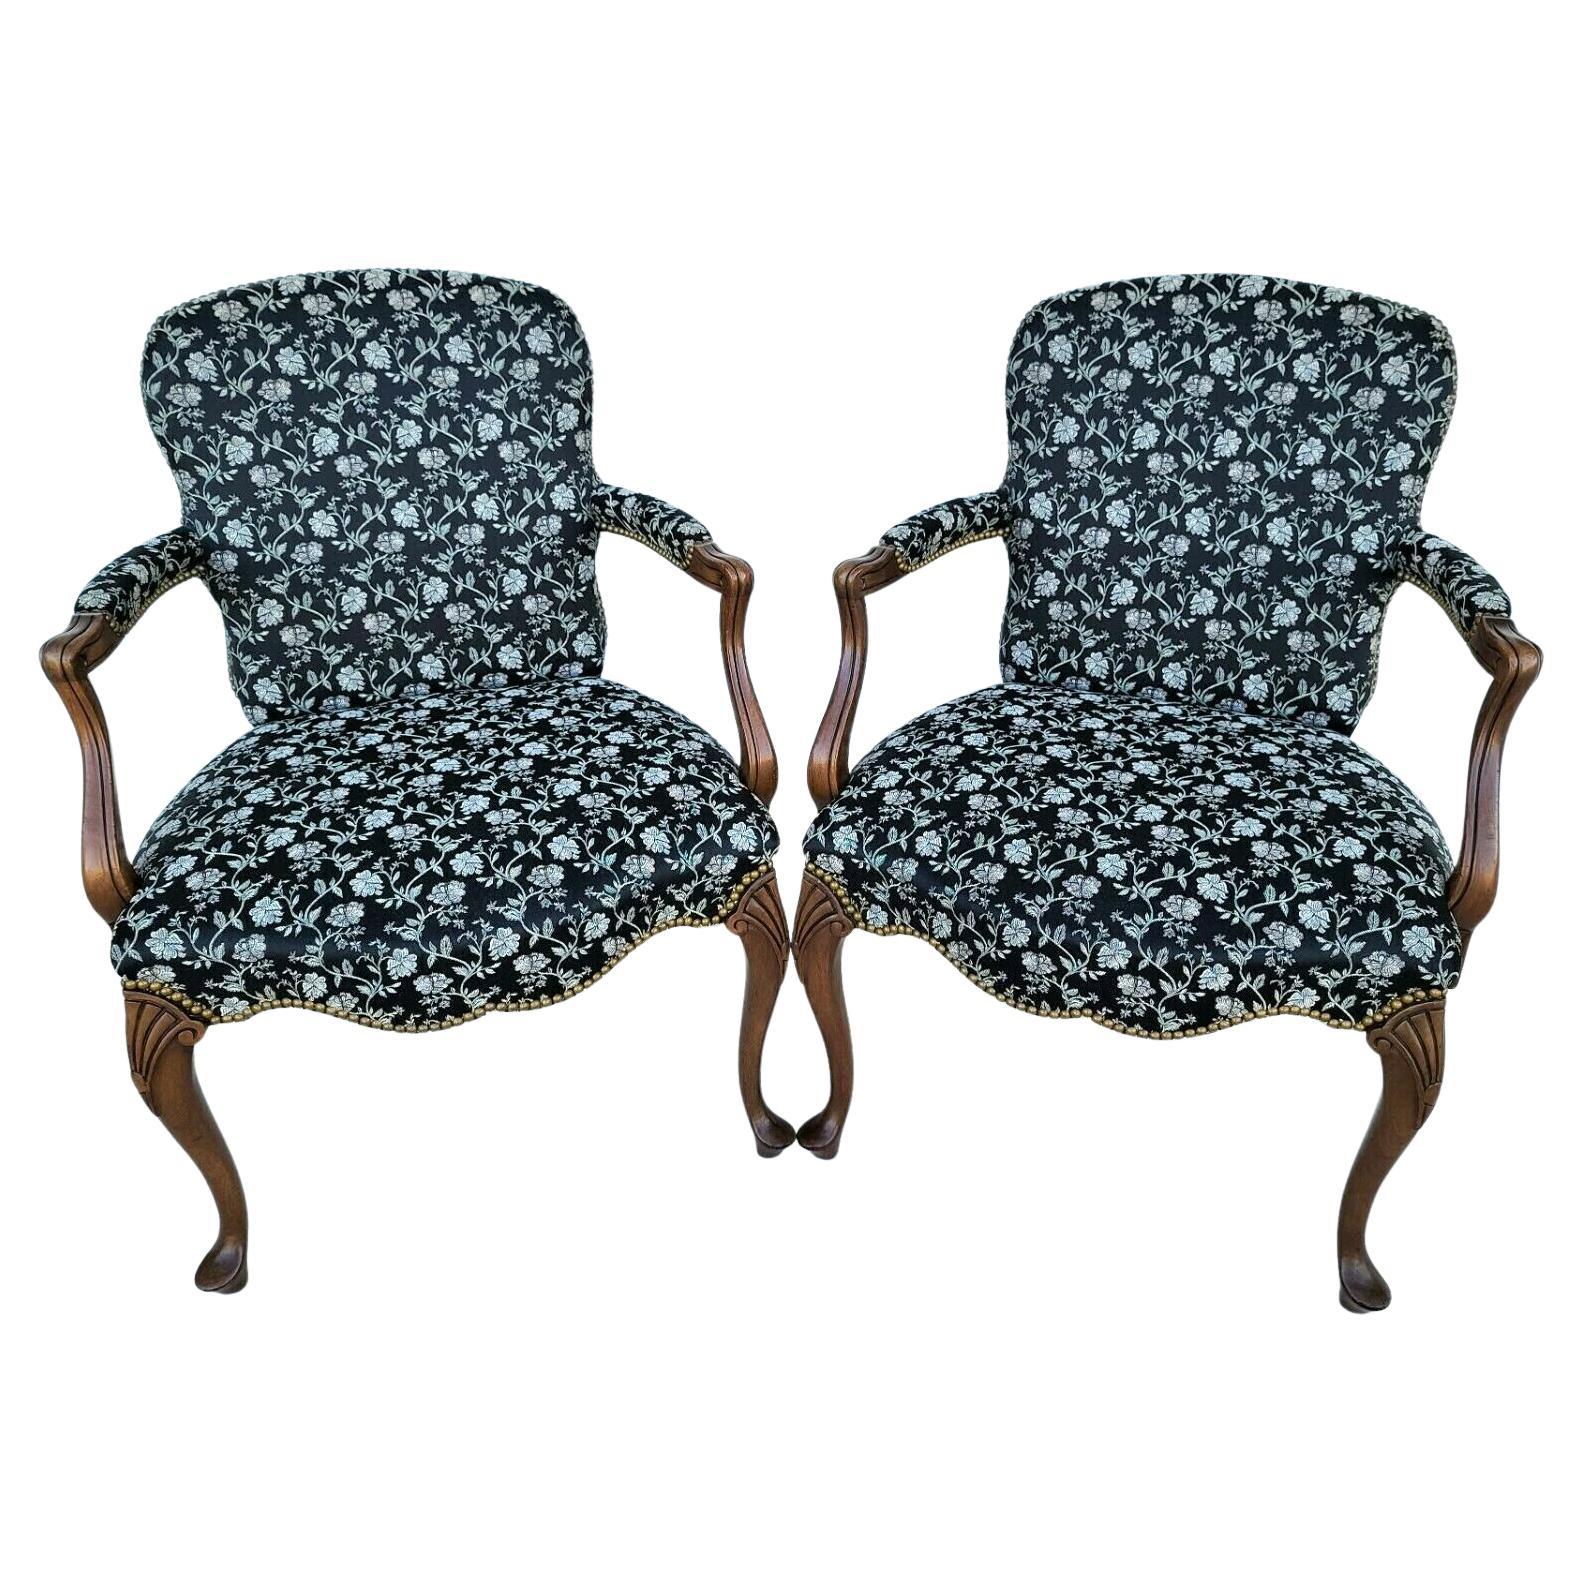 Vintage French Country Provincial Walnut Fauteuil Armchairs, a Pair For Sale